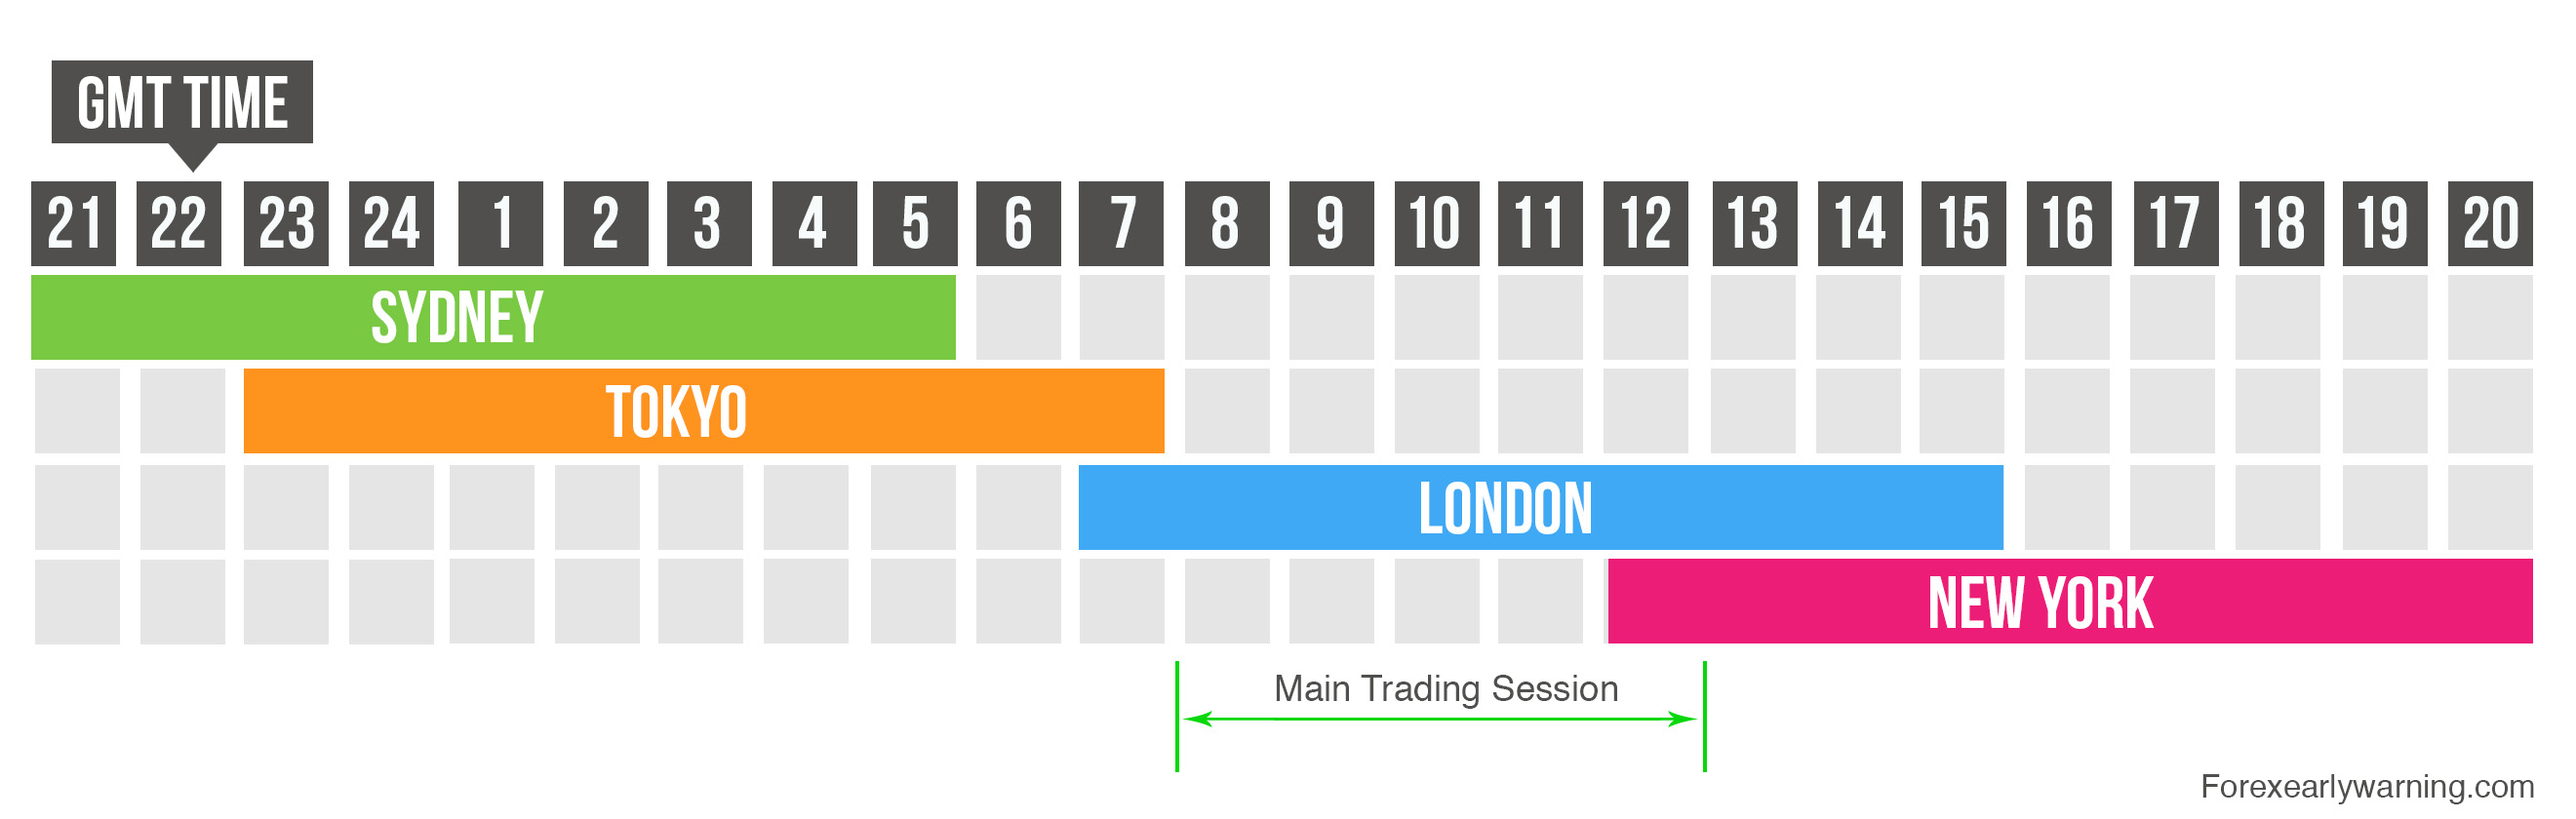 trading time table